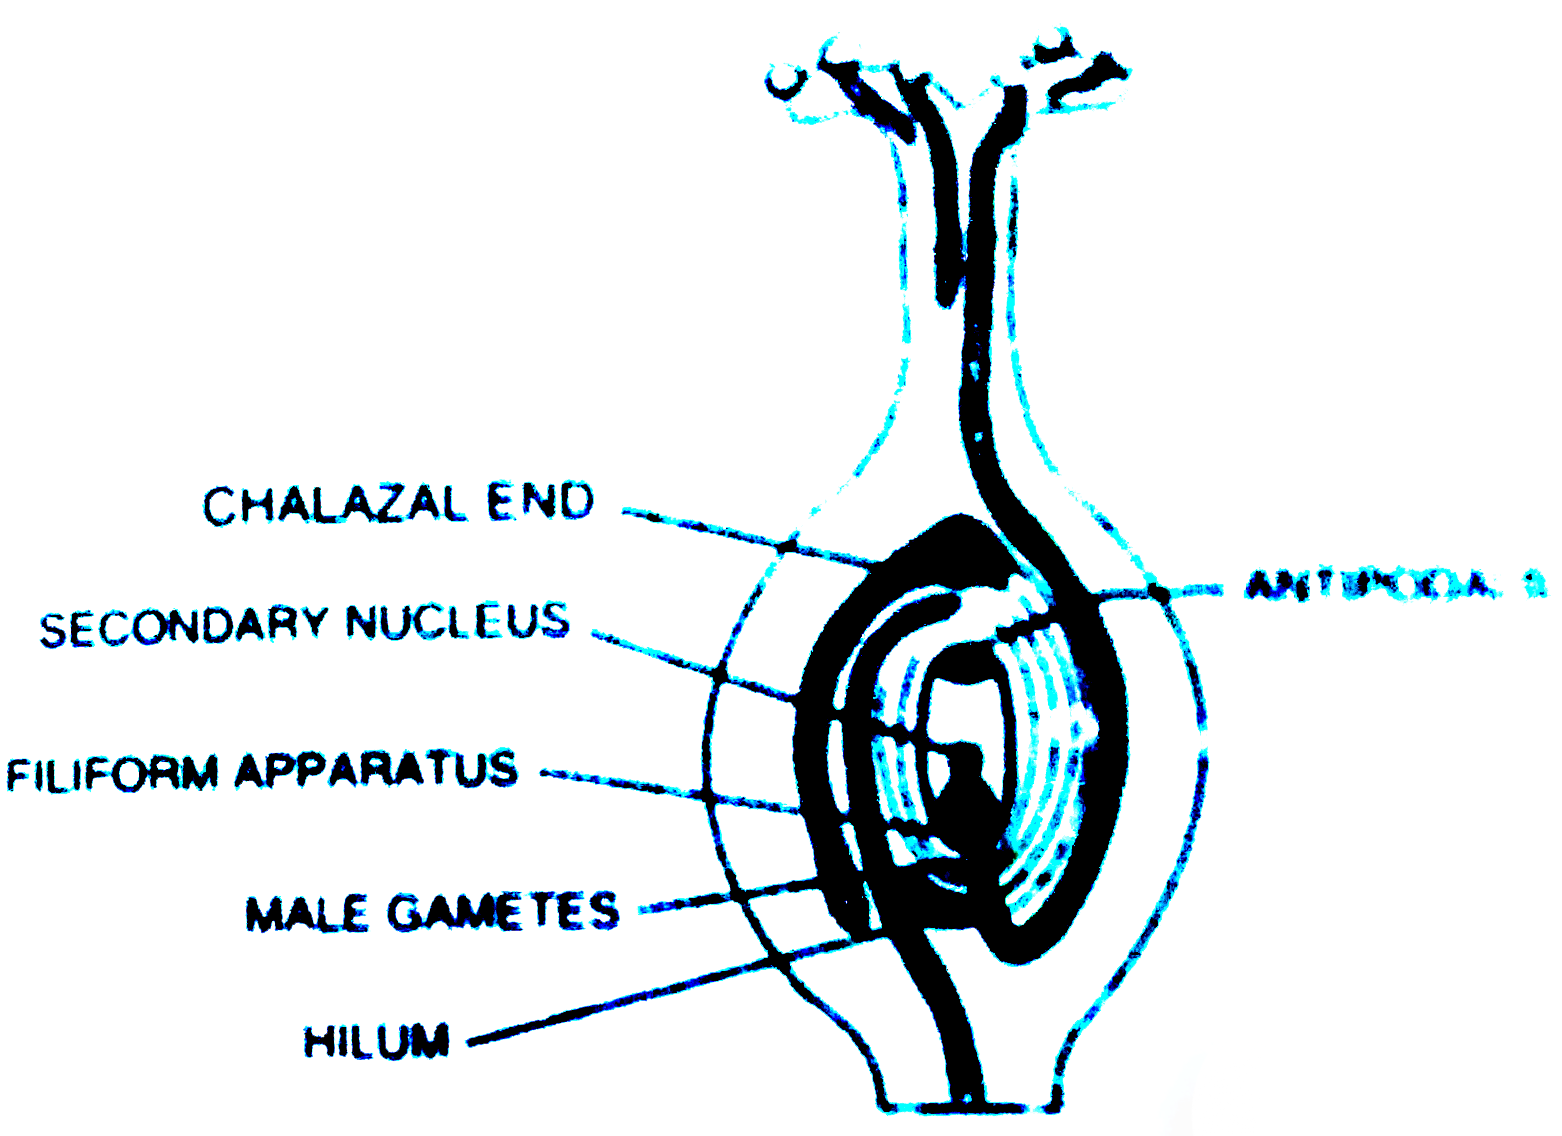 Draw a longitudinal section of a post-pollinated pistil showing entry of pollen tube into a mature embryo-sac. Label filiform apparatus, chalazal end, hilum, antipodals male gametes and secondary nucleus .